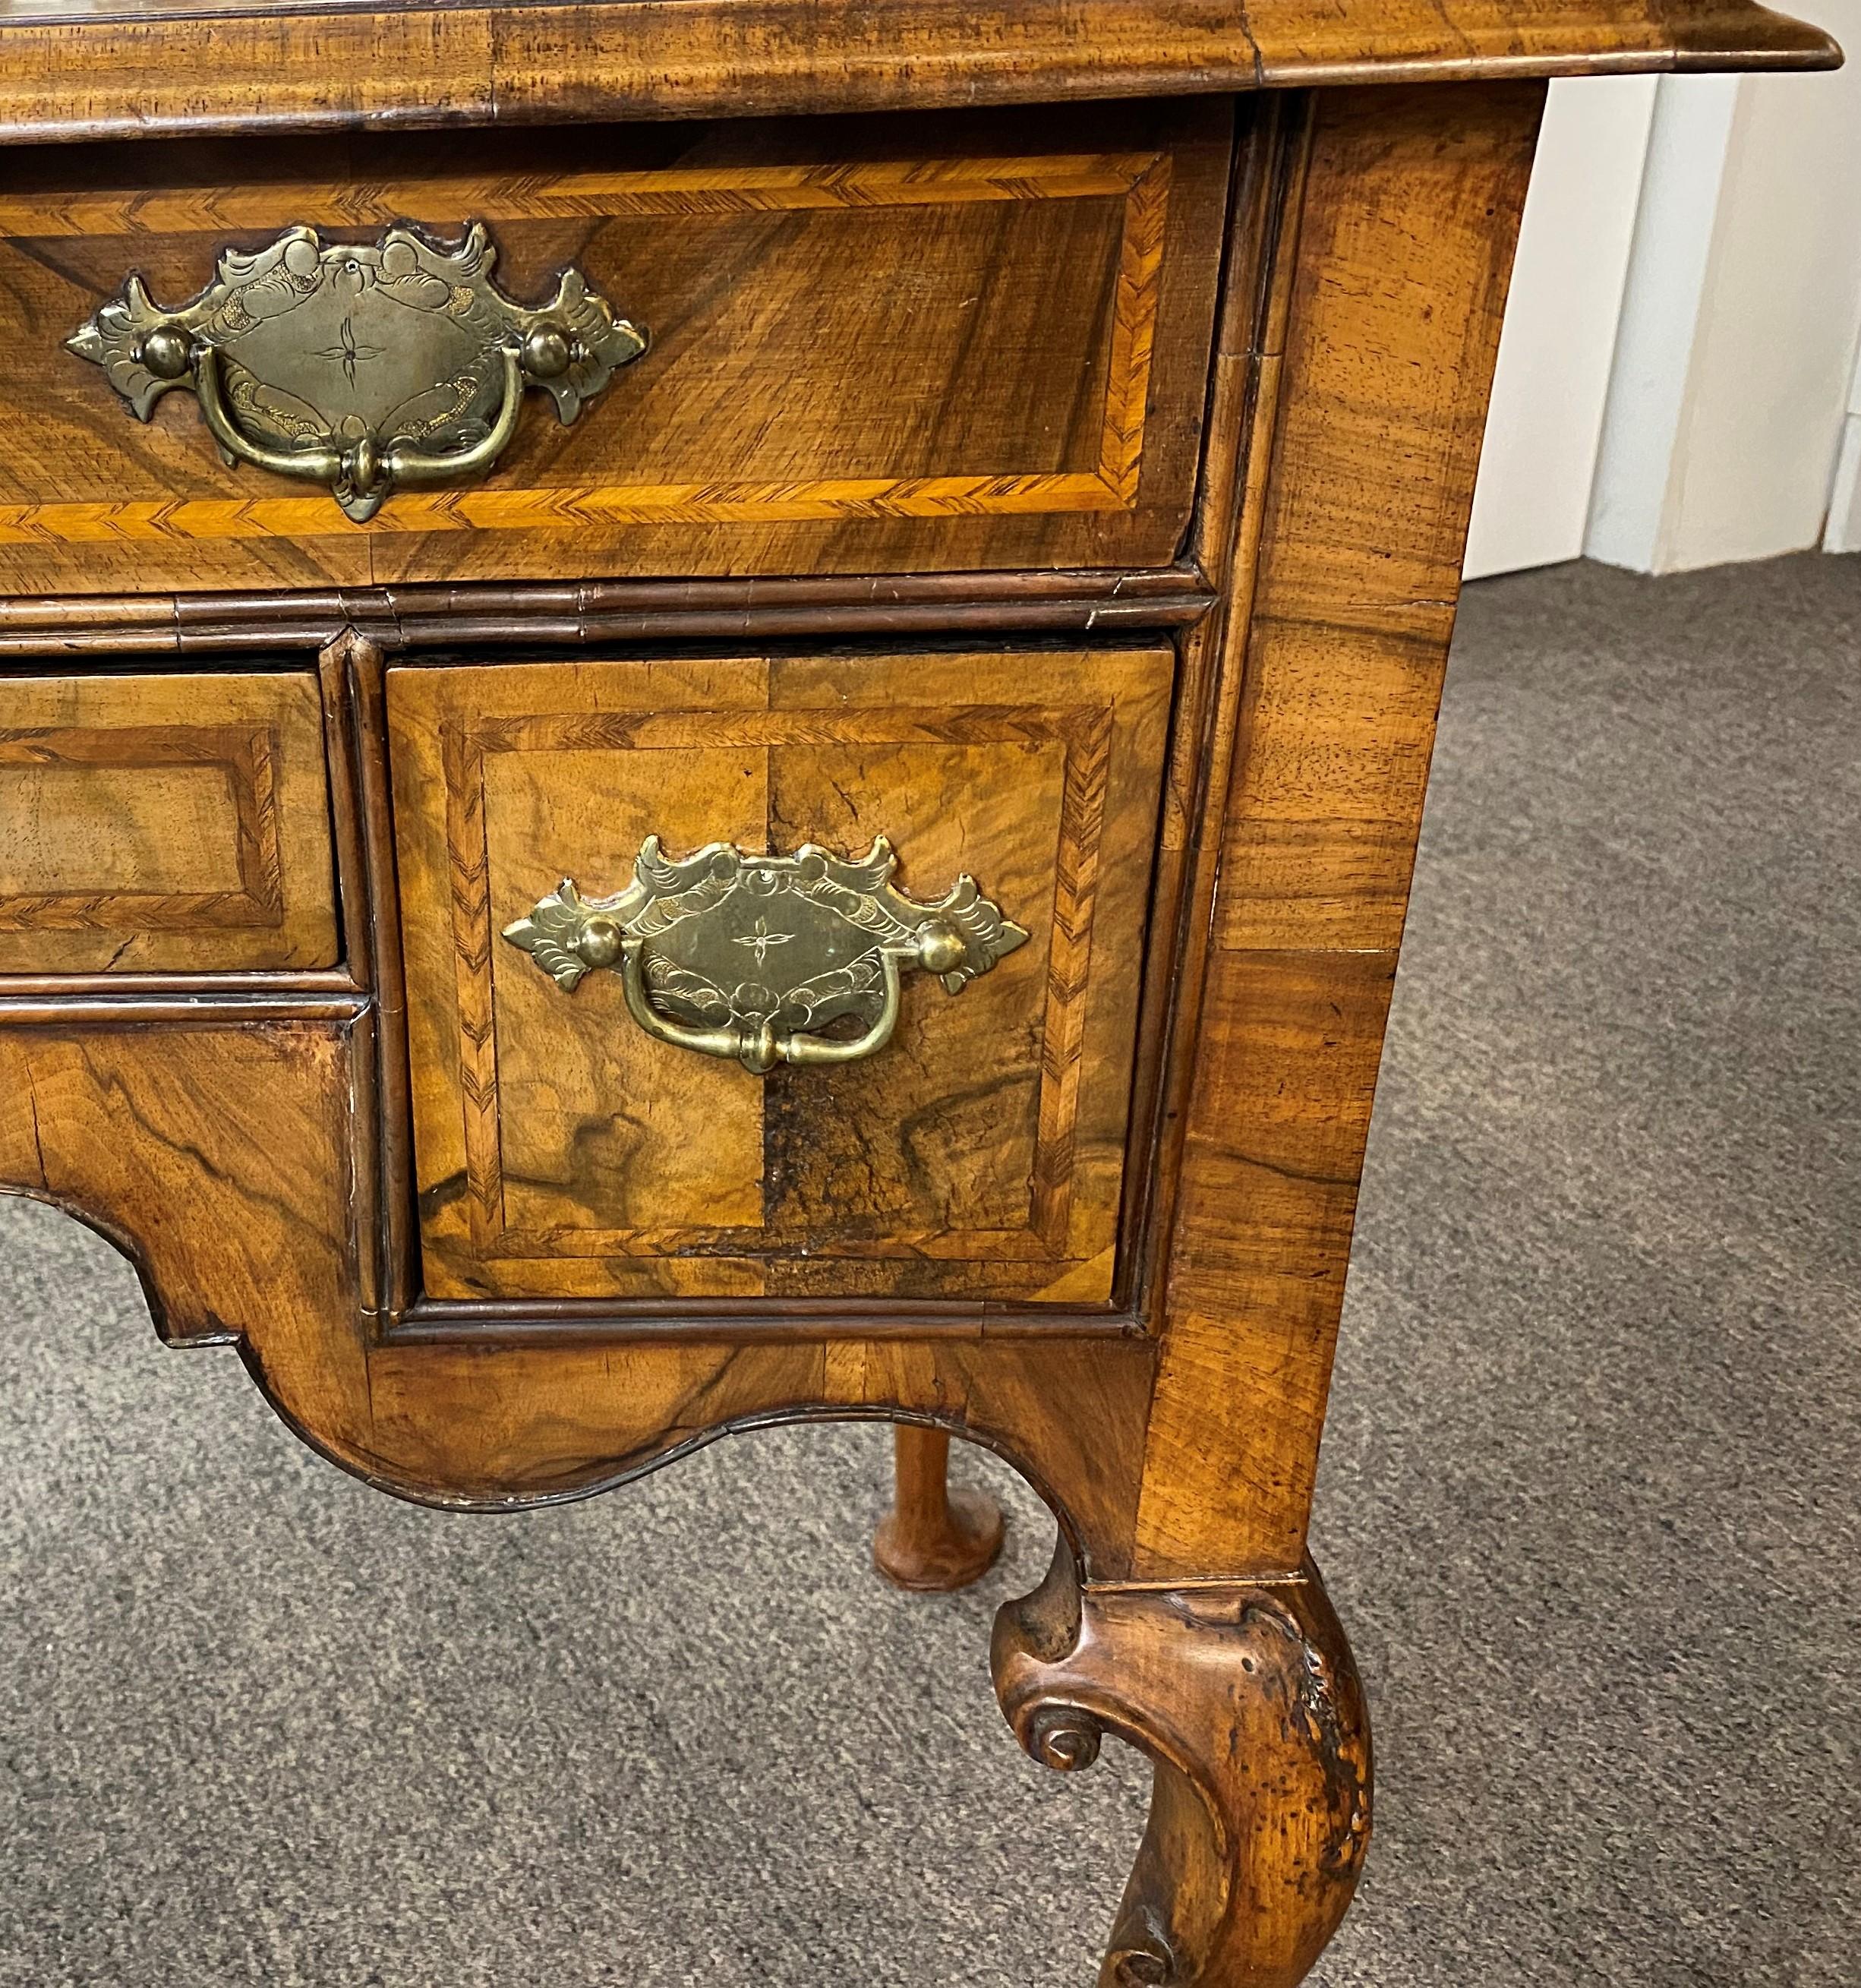 Fine English Lowboy or Dressing Table in Walnut & Burl Walnut circa 1750 In Good Condition For Sale In Milford, NH